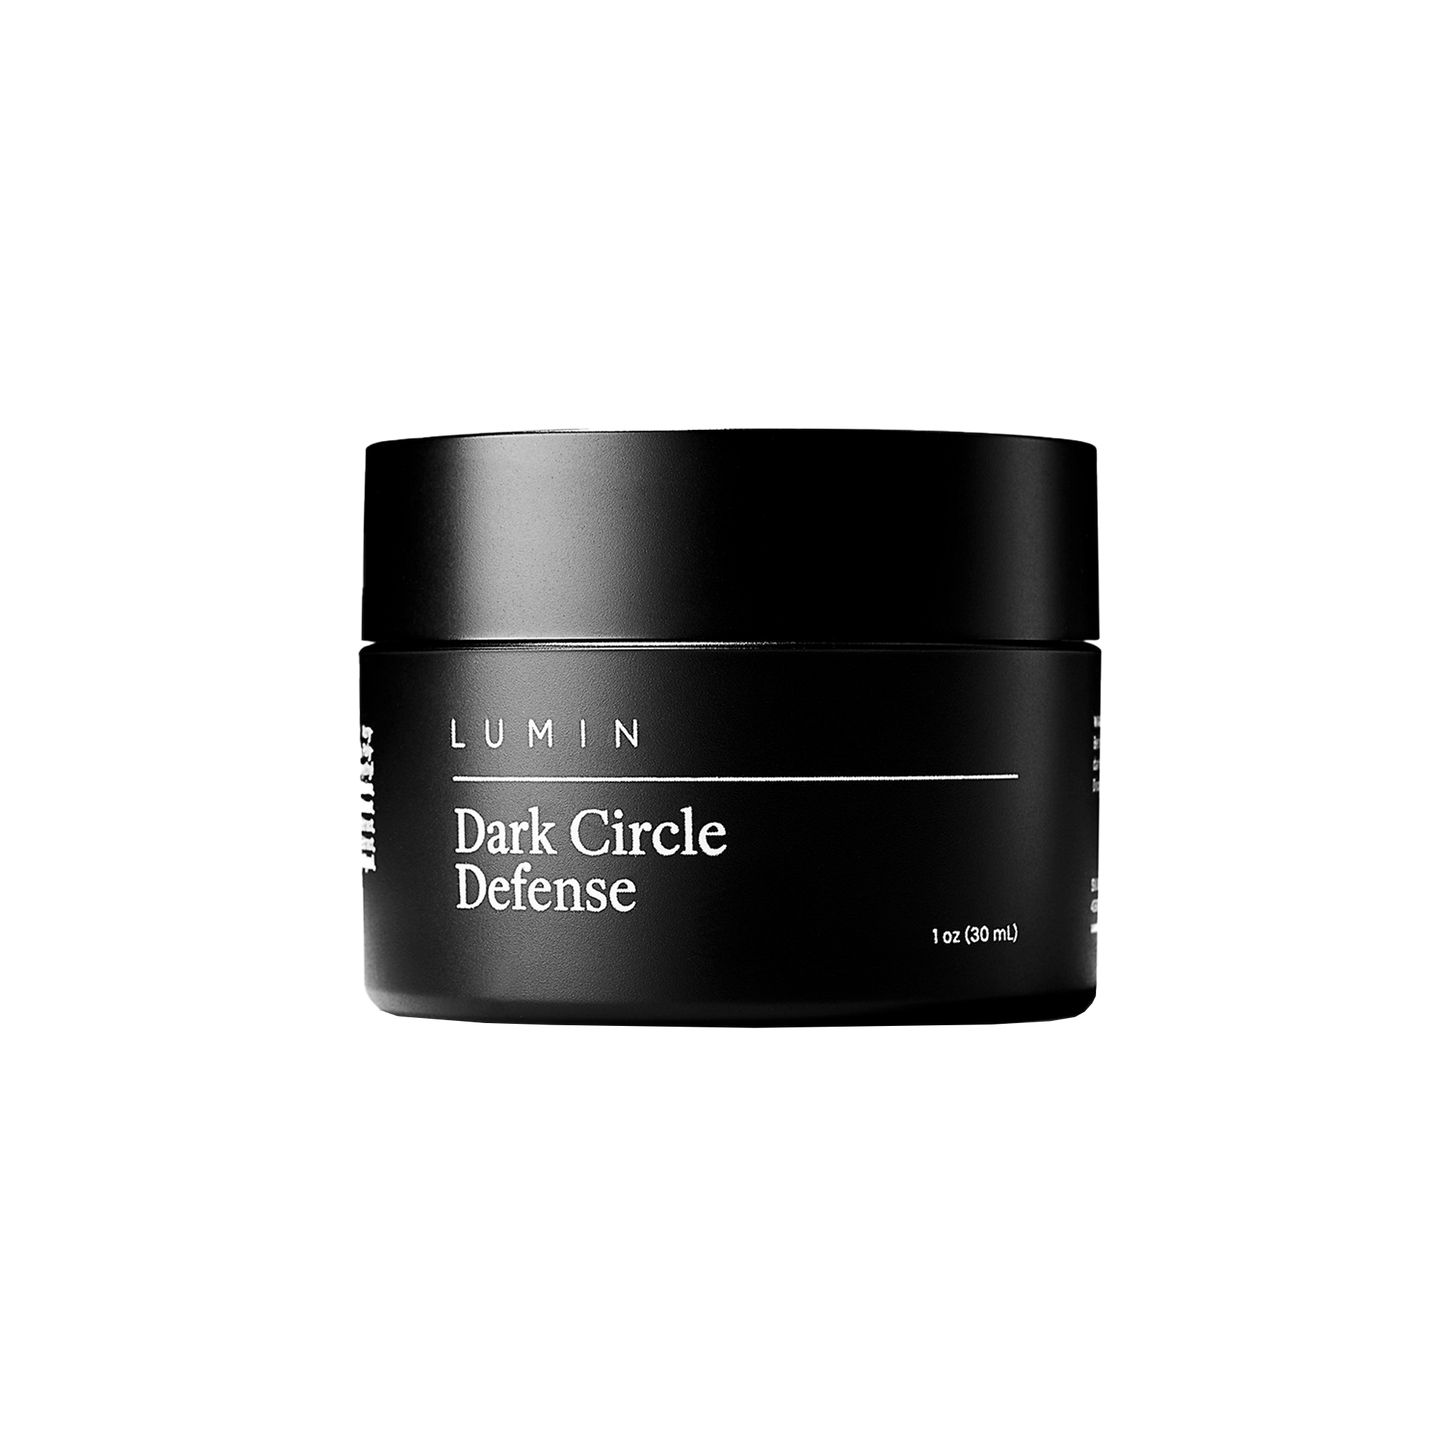 Lumin Dark Circle Defense: A daily dose of the best under-eye cream for men smooths out your crow’s feet and softens fine lines and wrinkles. Soothe tired, puffy eyes, brighten dark circles, and fight the signs of premature aging with this must-have addition to your men's skincare routine.  All skin types. Whether you have dry, sensitive, or acne-prone skin, this nourishing eye cream for men can improve the appearance of your under-eye area with nightly use.